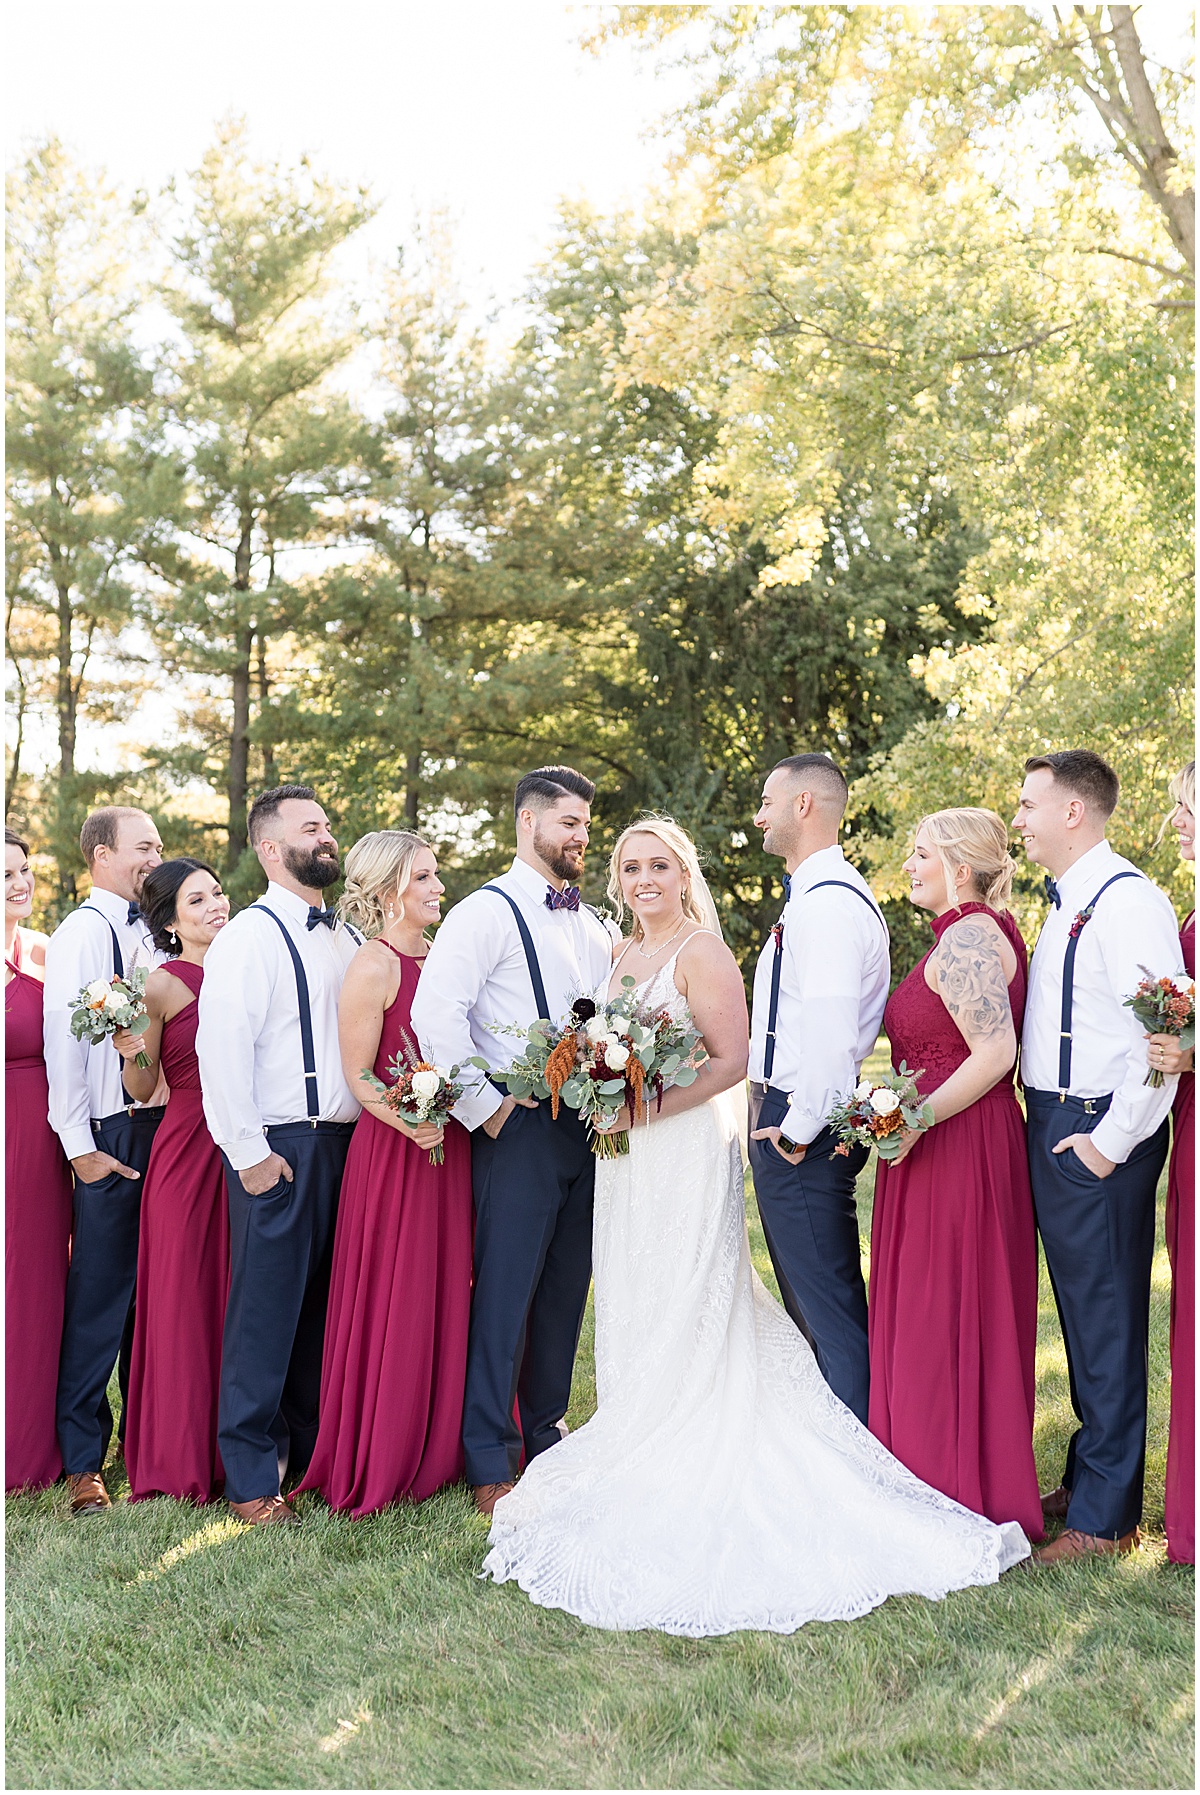 Bridal party photos in navy and maroon at Finley Creek Vineyards wedding in Zionsville, Indiana